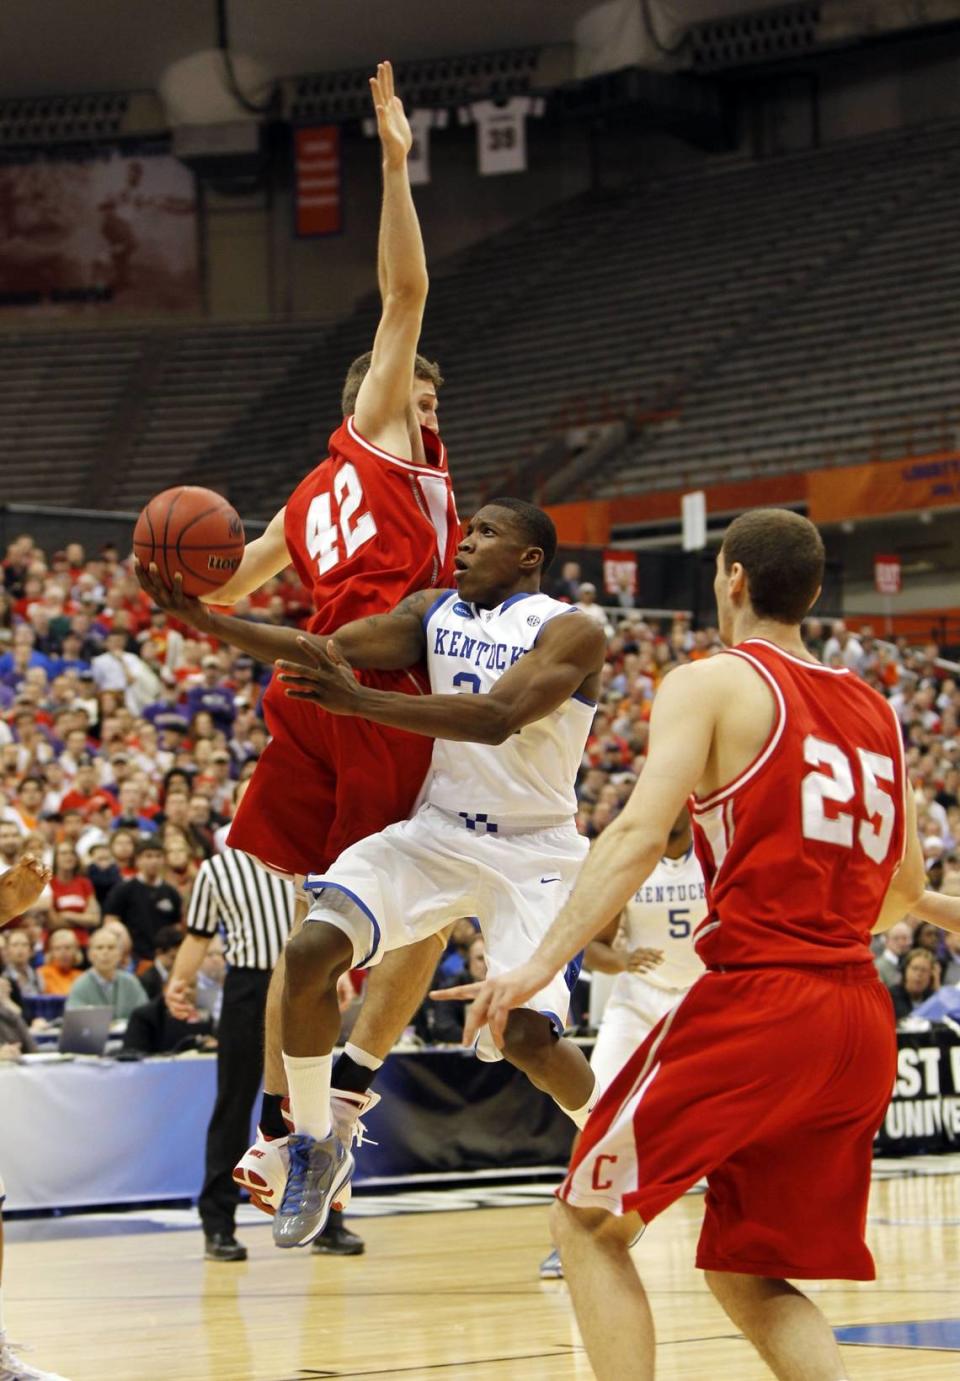 Current Pennsylvania head coach Steve Donahue has coached against Kentucky once before. In the 2010 NCAA Tournament round of 16, UK defeated the Big Red 62-45. In the picture, Kentucky guard Eric Bledsoe scored on a drive past Cornell’s Mark Coury, a former UK player.